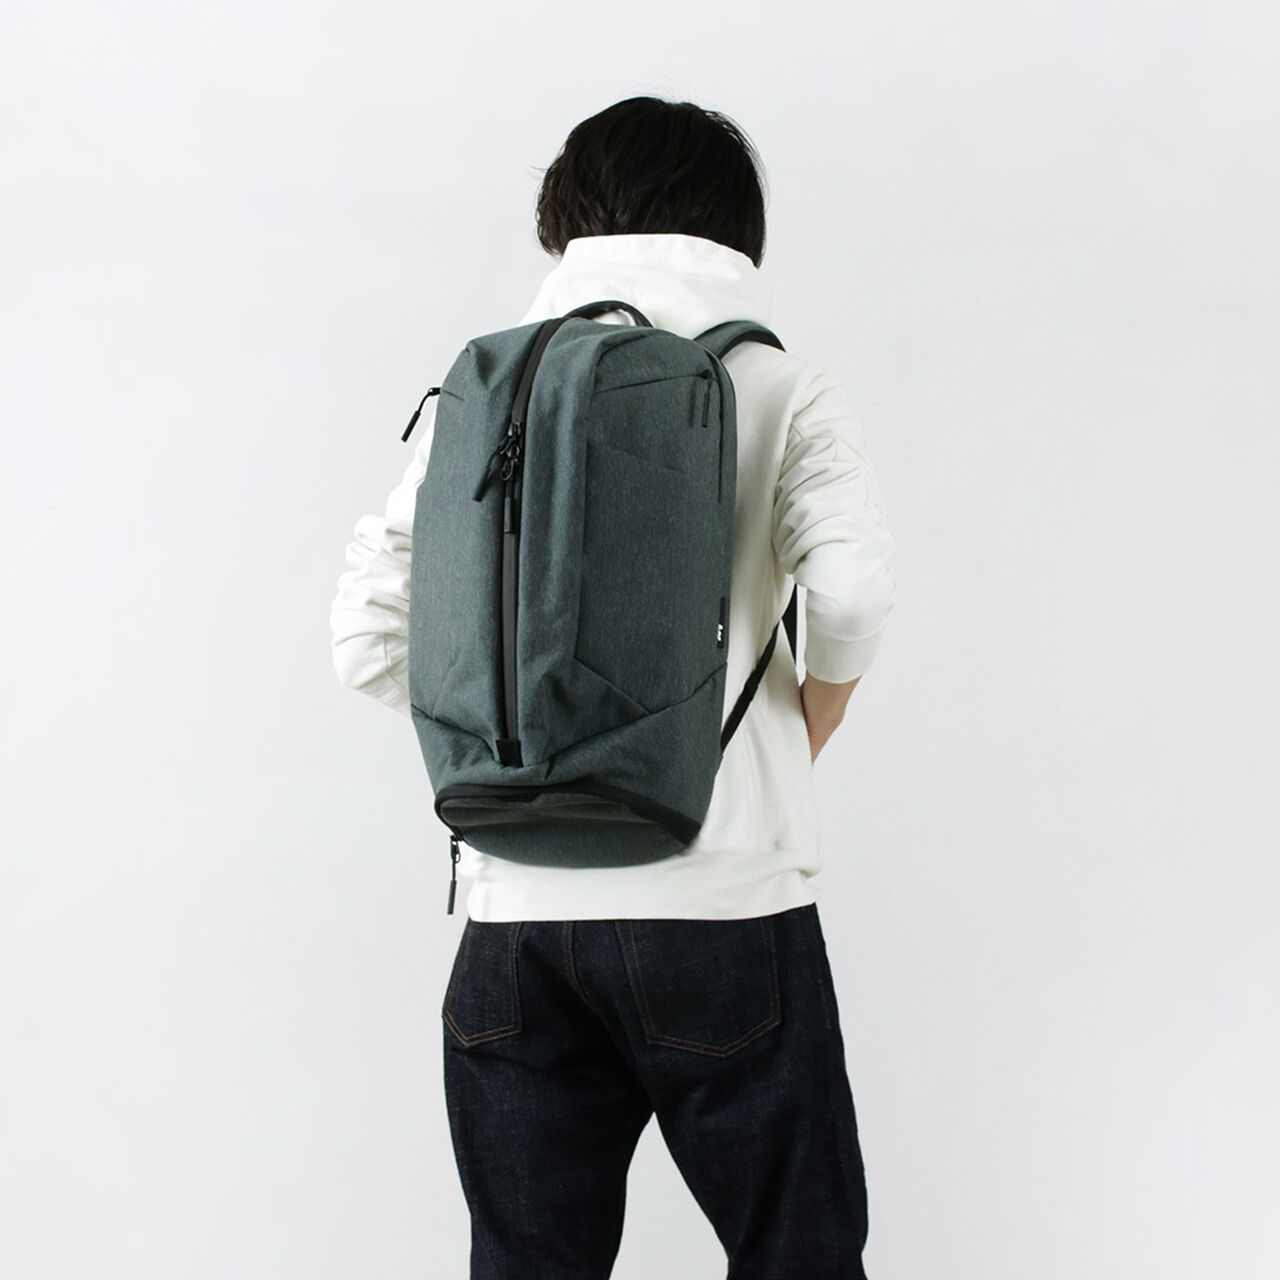 Duffel Pack 3,Grey, large image number 0